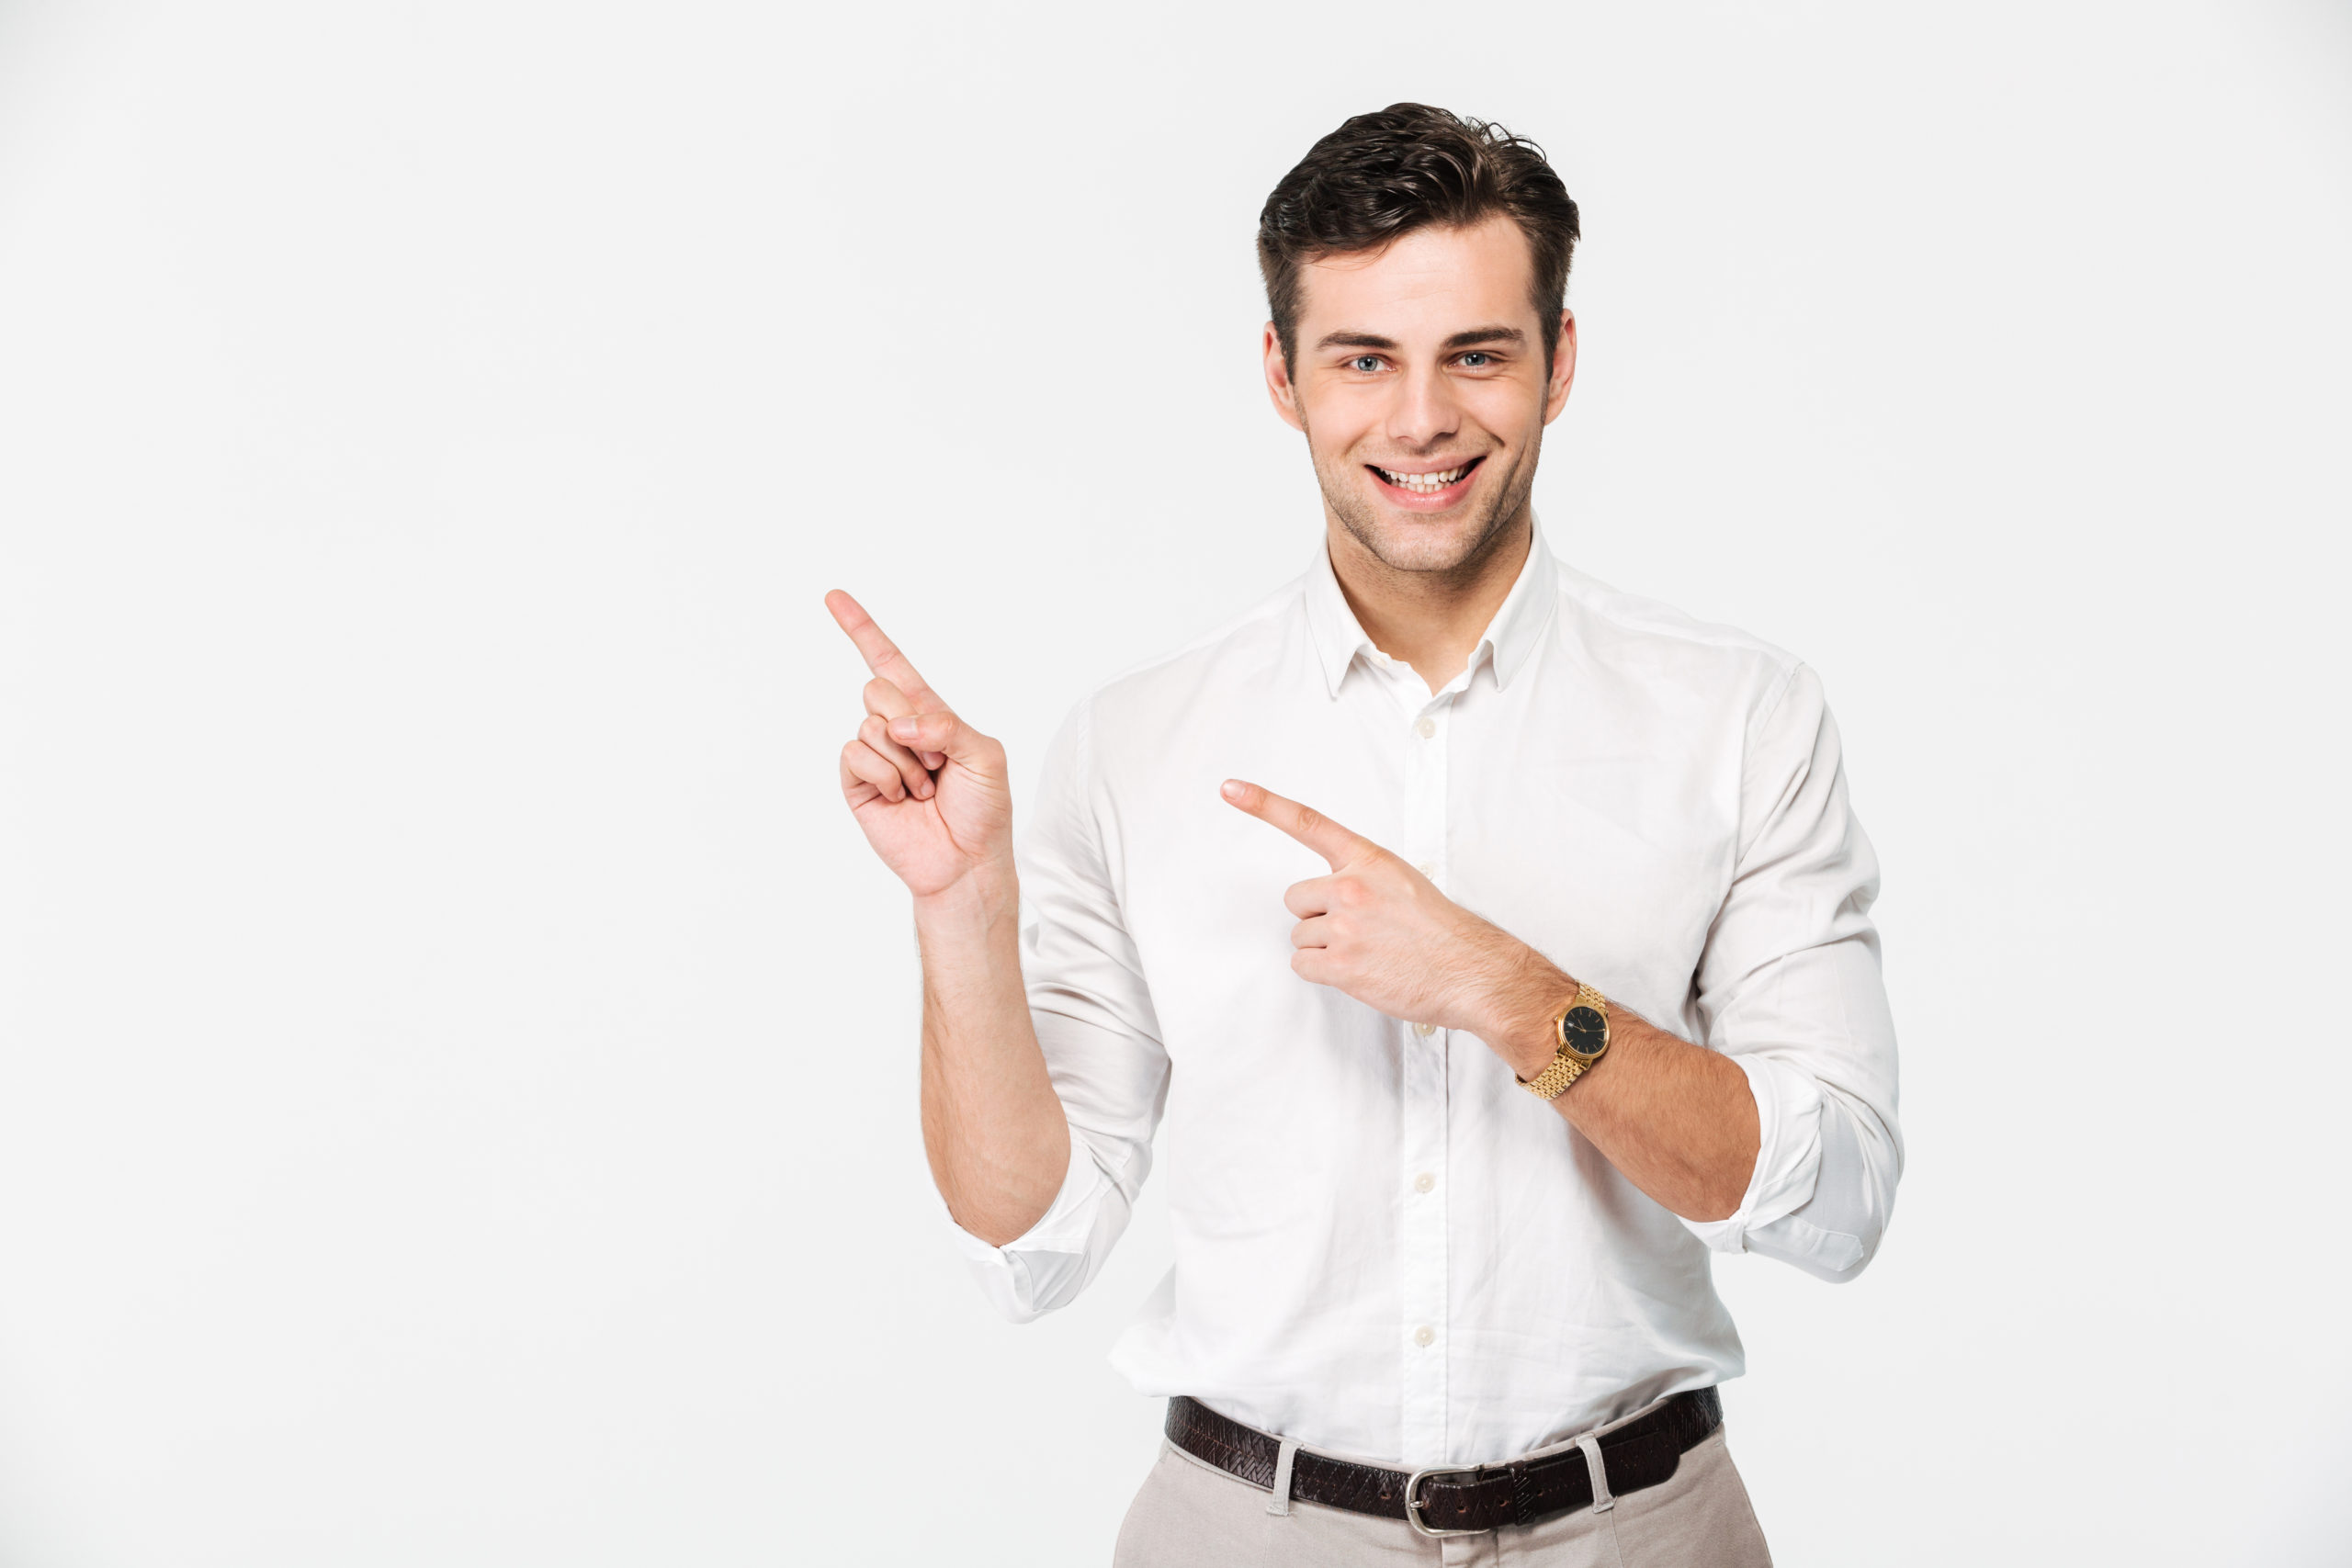 Portrait of a joyful young man in white shirt pointing two fingers away at copy space while standing and looking at camera isolated over white background